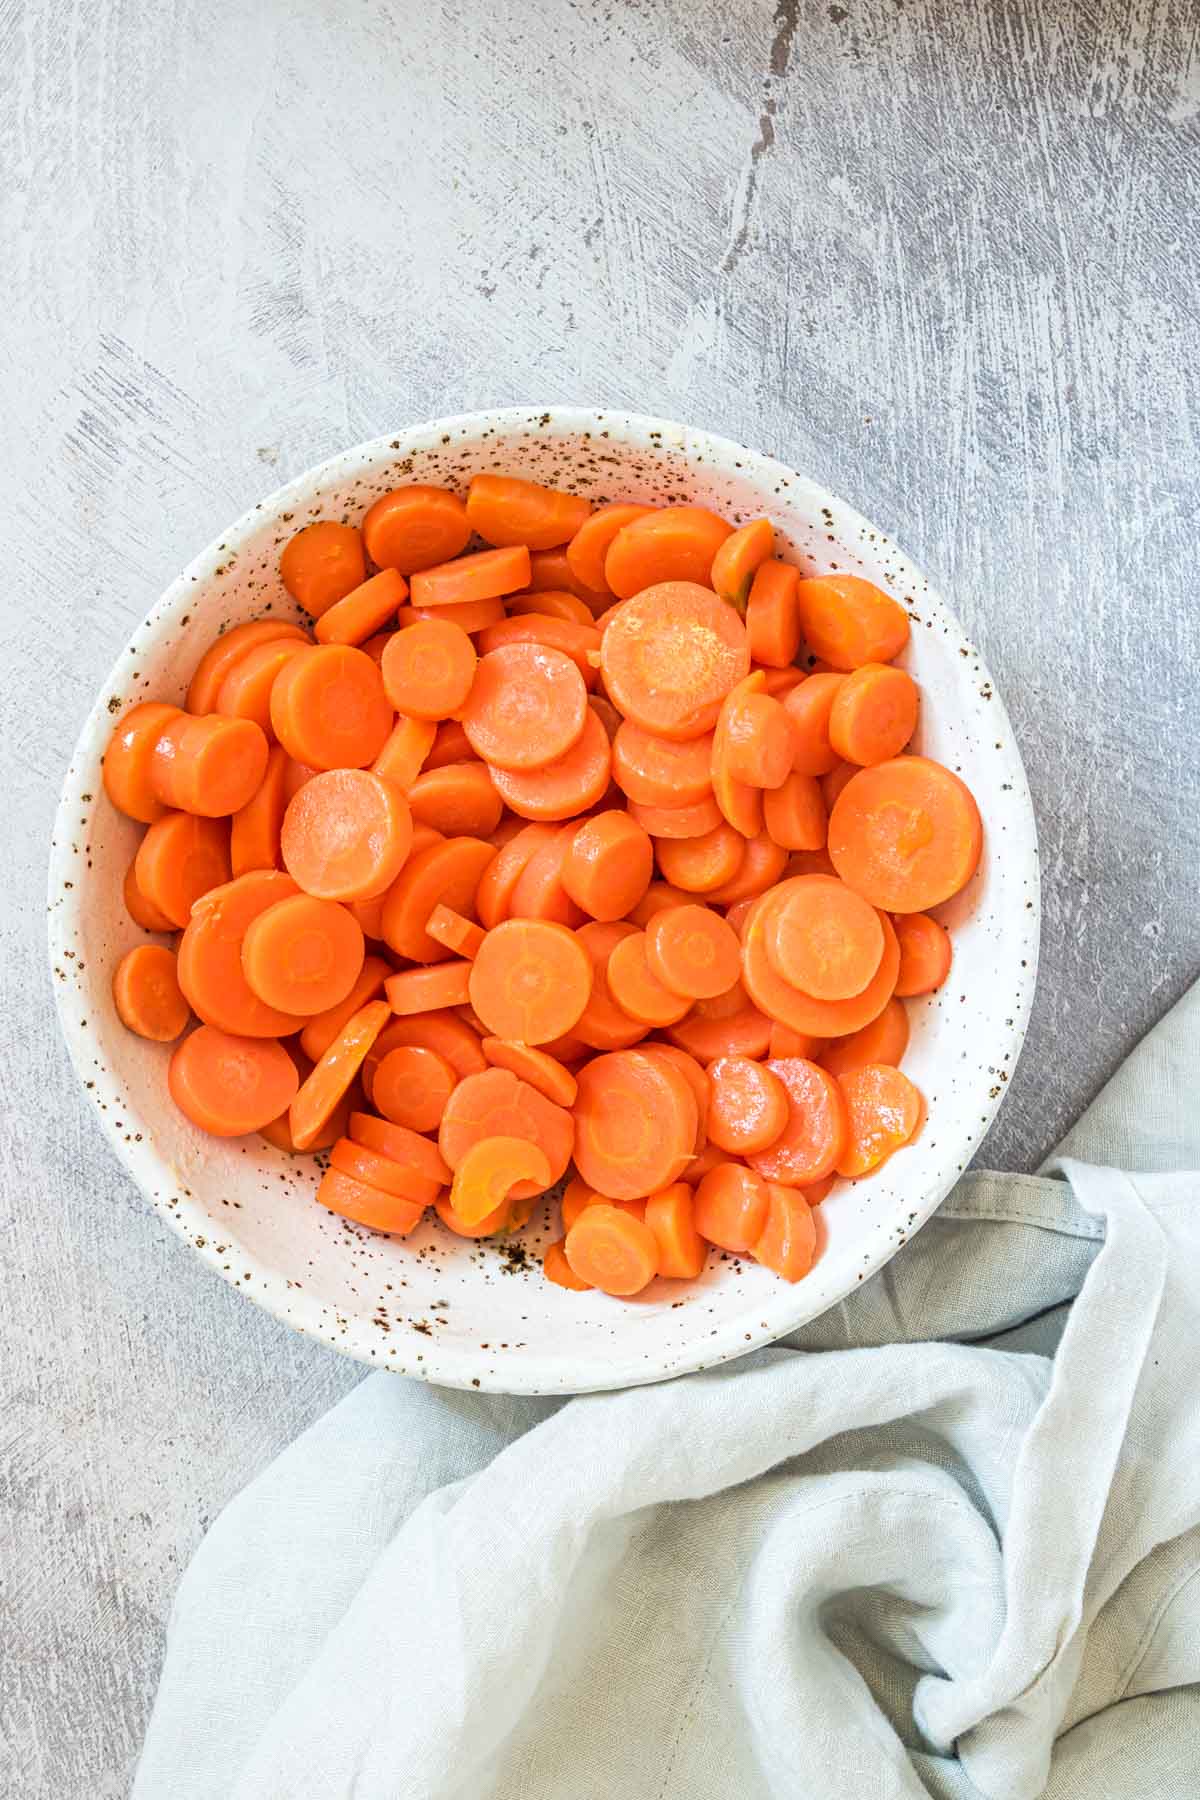 How To Boil Carrots